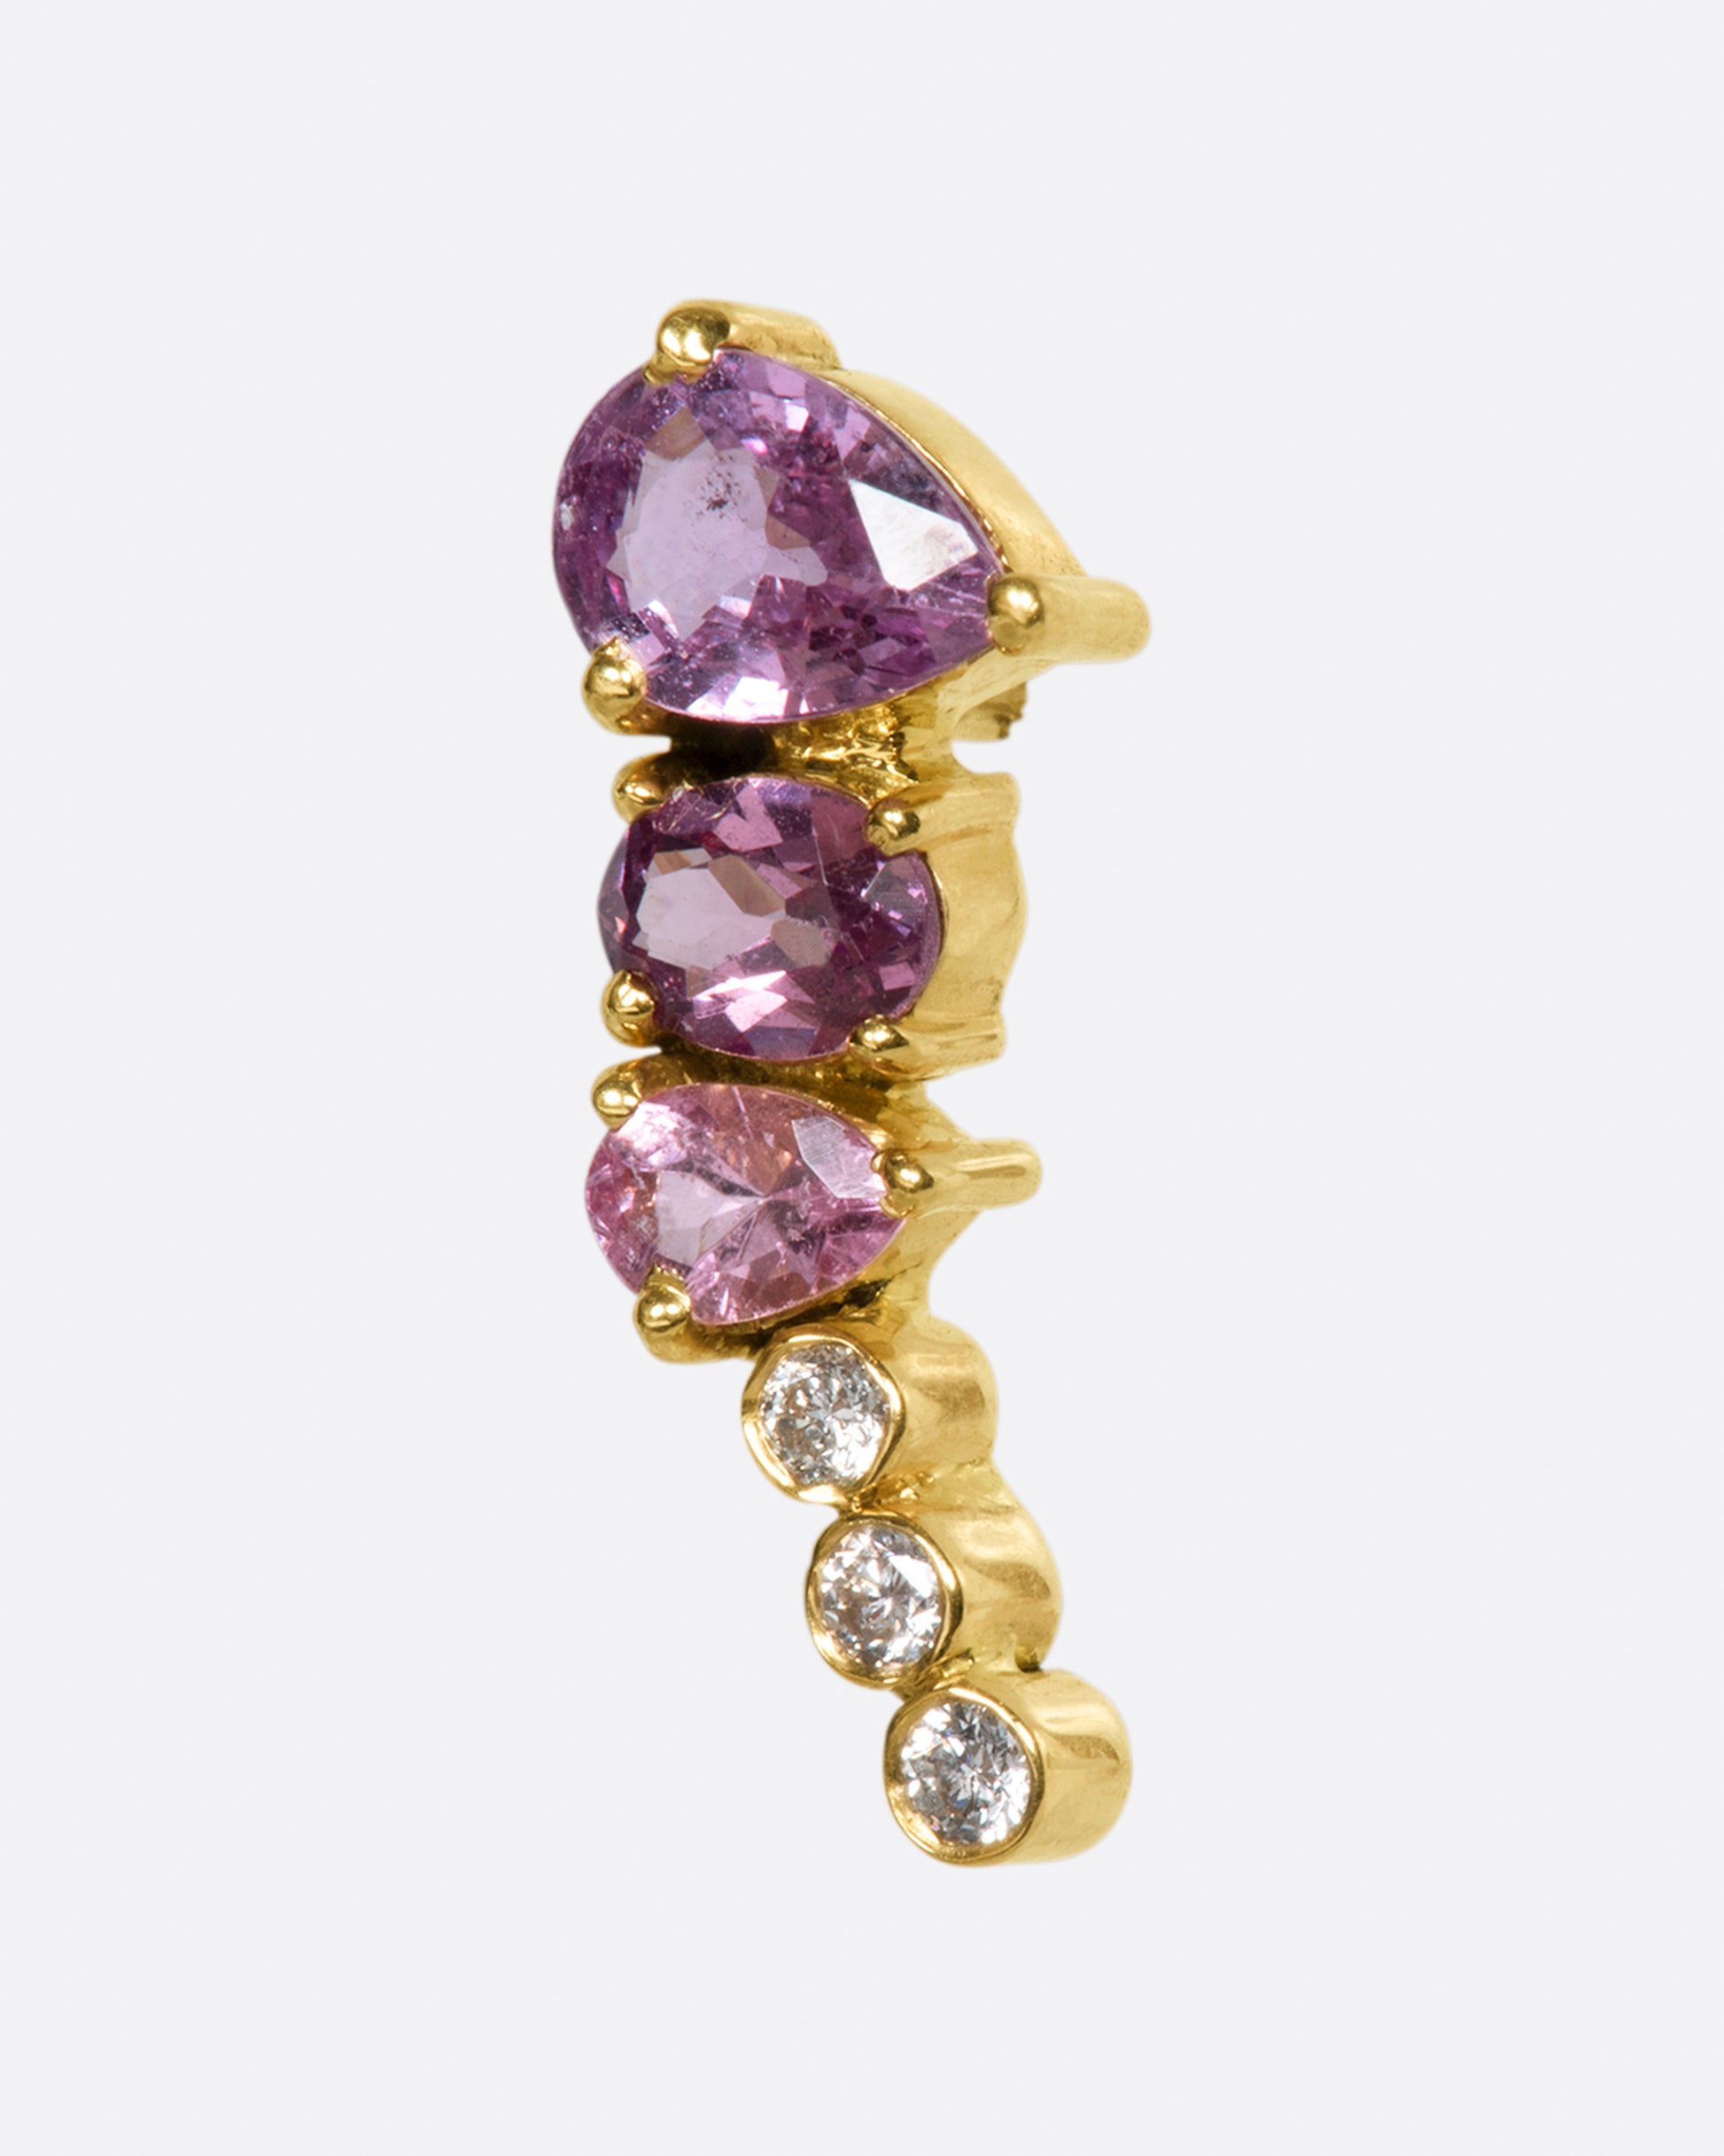 An exceptional pink and purple sapphire and tourmaline earring that elegantly tapers to a diamond tail. 